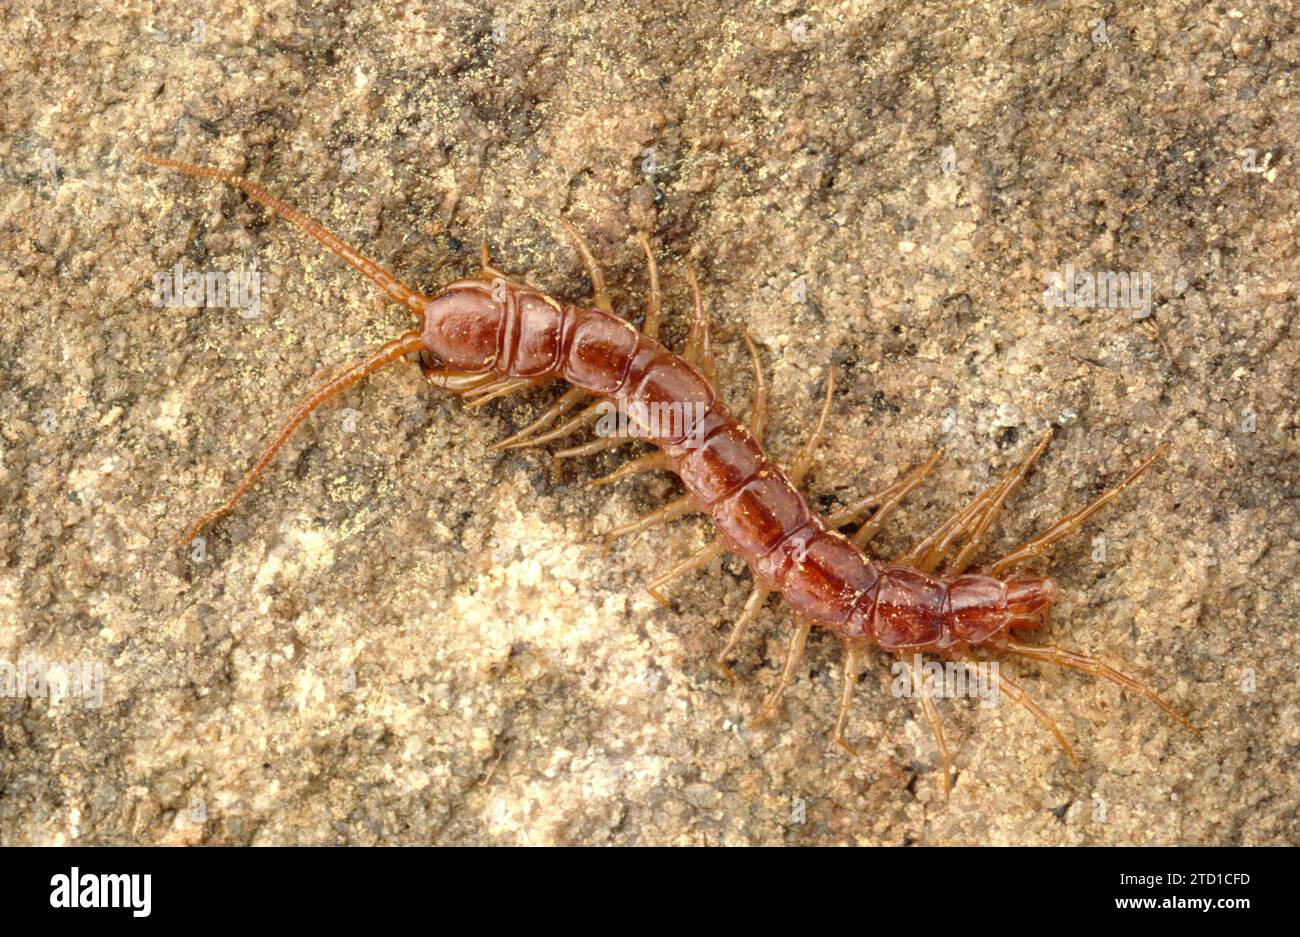 Brown centipede or stone centipede (Lithobius piceus) is a myriapoda native to central and southern Europe. Stock Photo